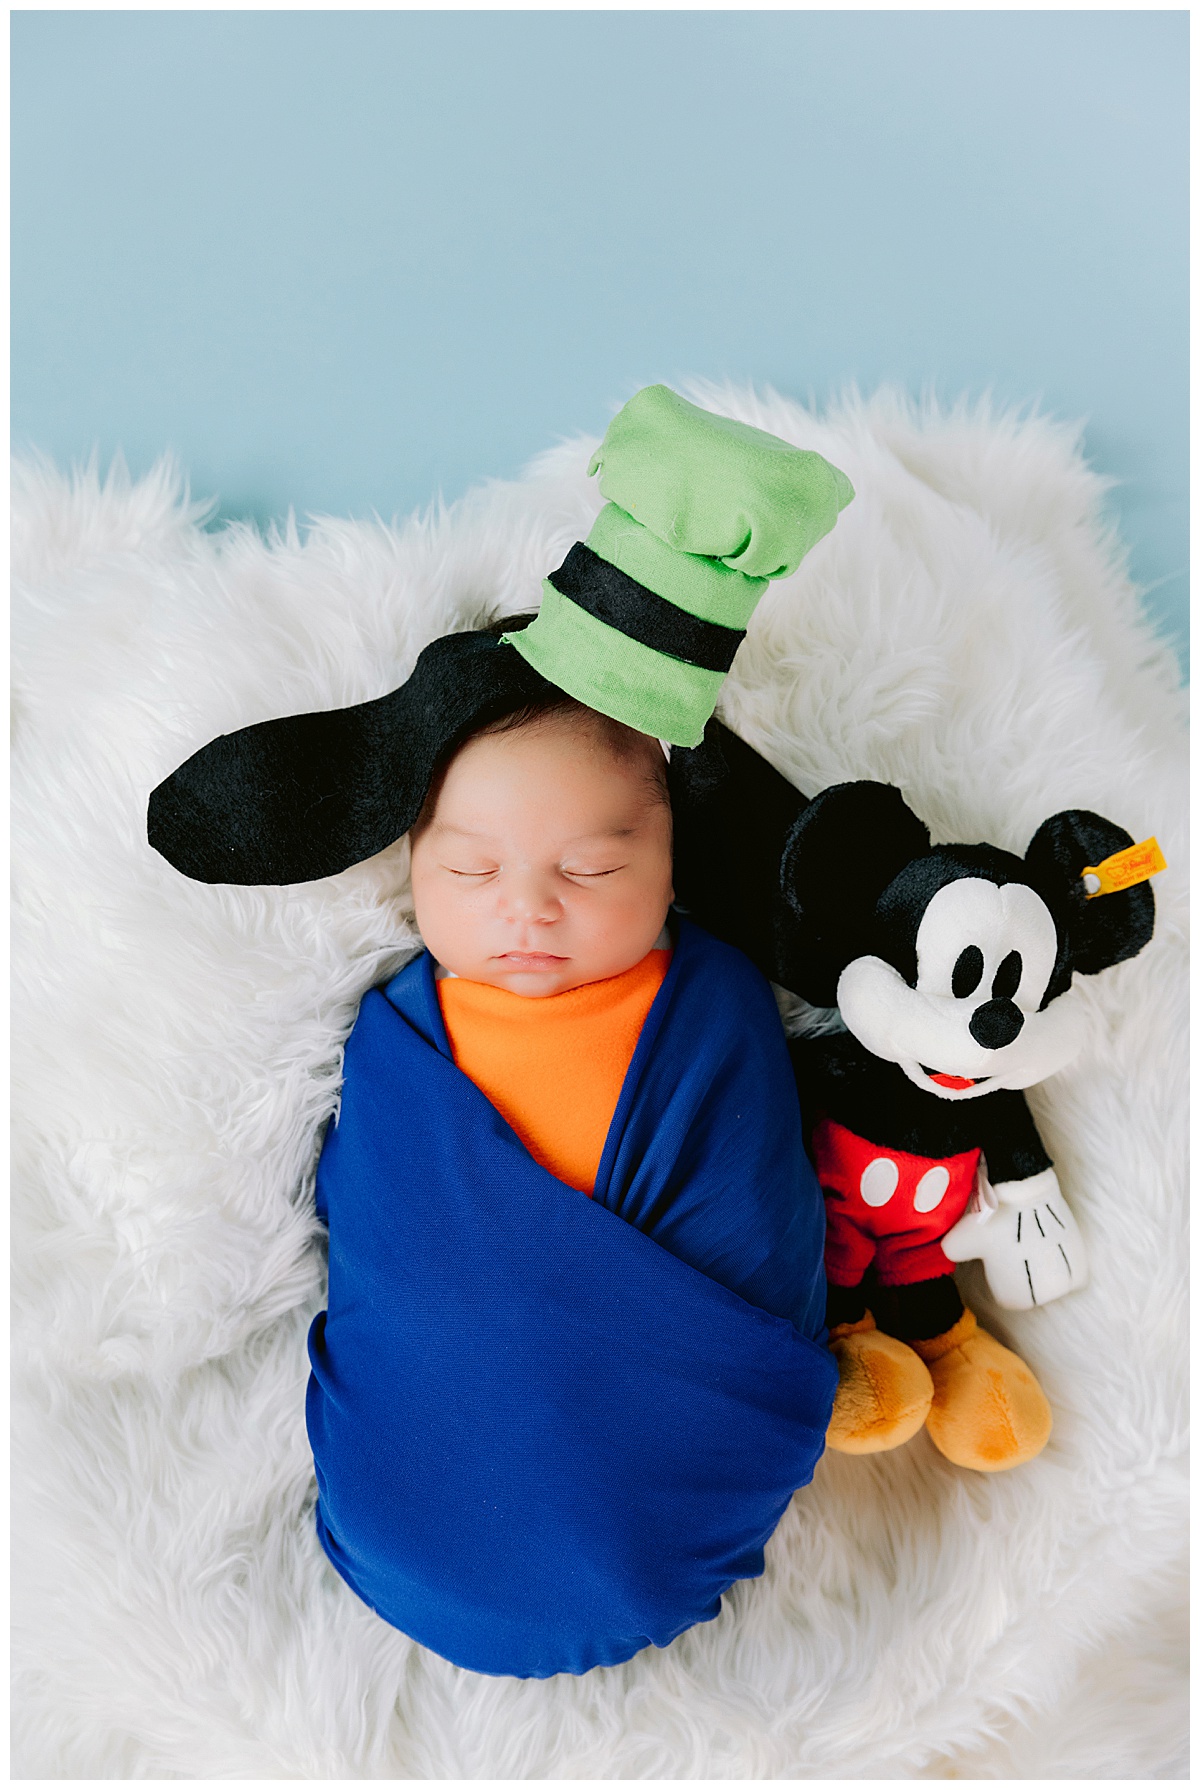 The Perfect Age for Newborn Photos: What You Need to Know - Disney Newborn Photography ideas and inspiration by White Rabbit Photo Boutique. This little one's Disney-loving family wanted portraits as Goofy, with a few other special magical touches.